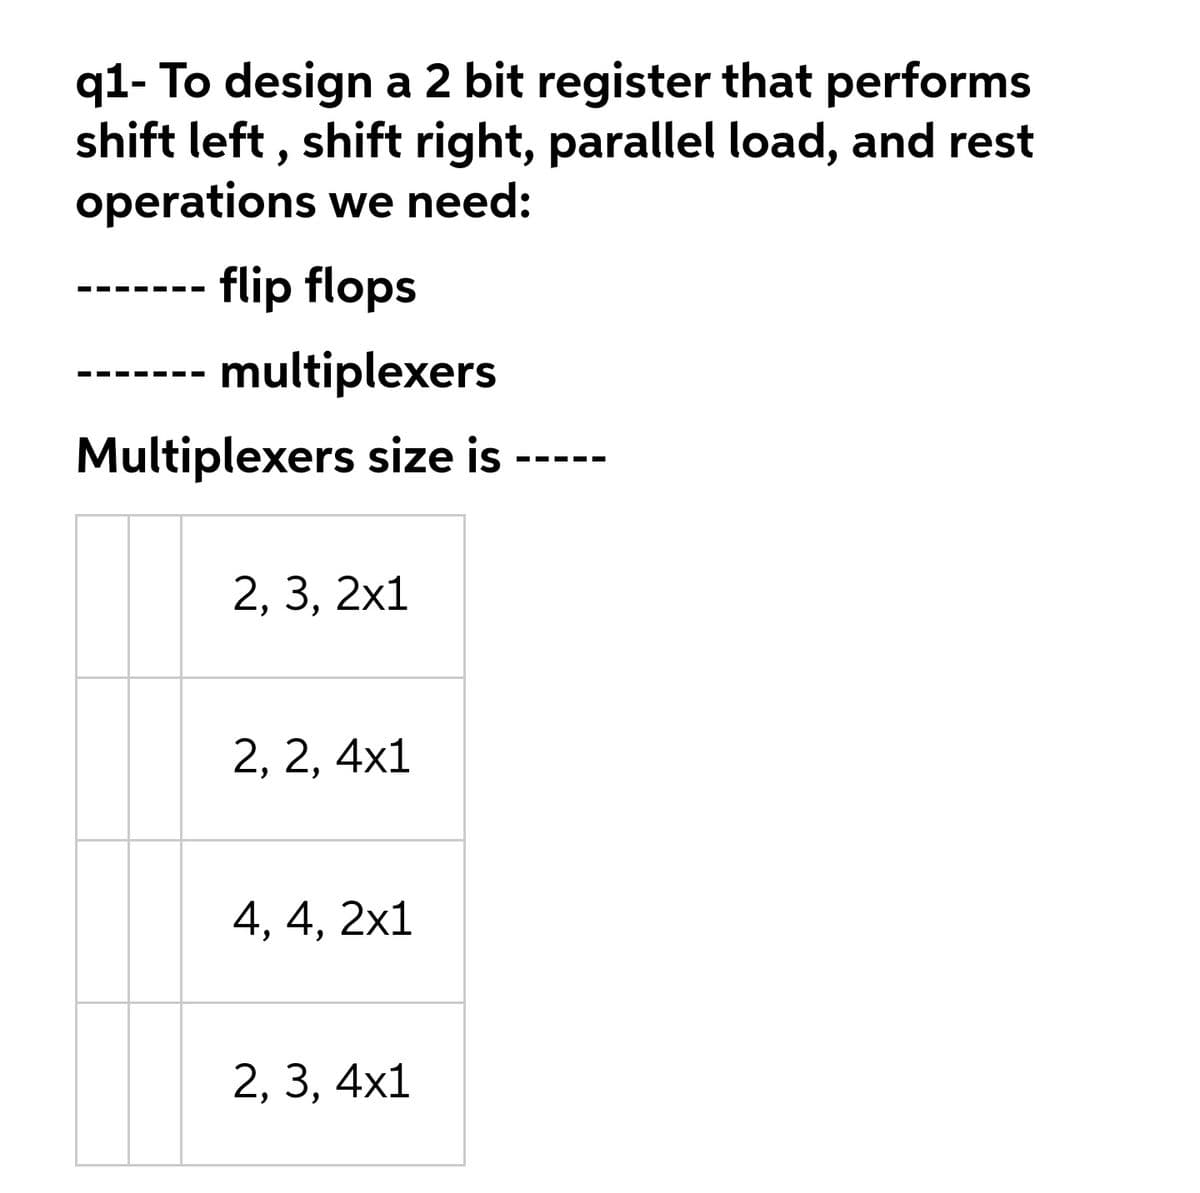 q1- To design a 2 bit register that performs
shift left , shift right, parallel load, and rest
operations we need:
flip flops
multiplexers
Multiplexers size is
2, 3, 2x1
2, 2, 4x1
4, 4, 2x1
2, 3, 4xх1
